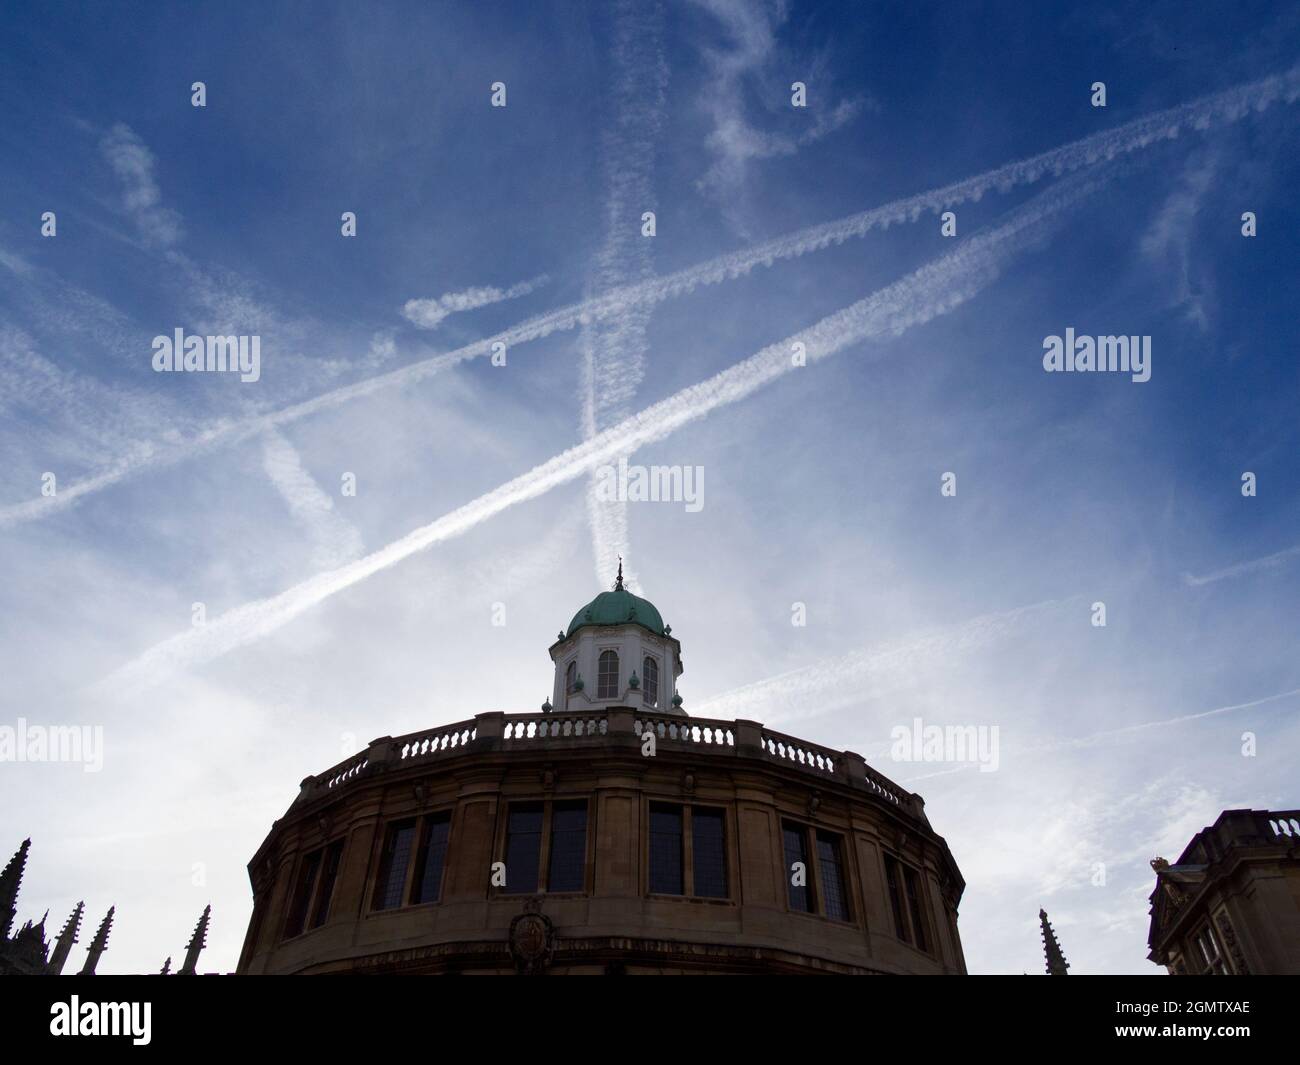 The distinctive round Sheldonian Theatre, located in the heart of Oxford, England, was built from 1664 to 1669 based on an early design by Christopher Stock Photo